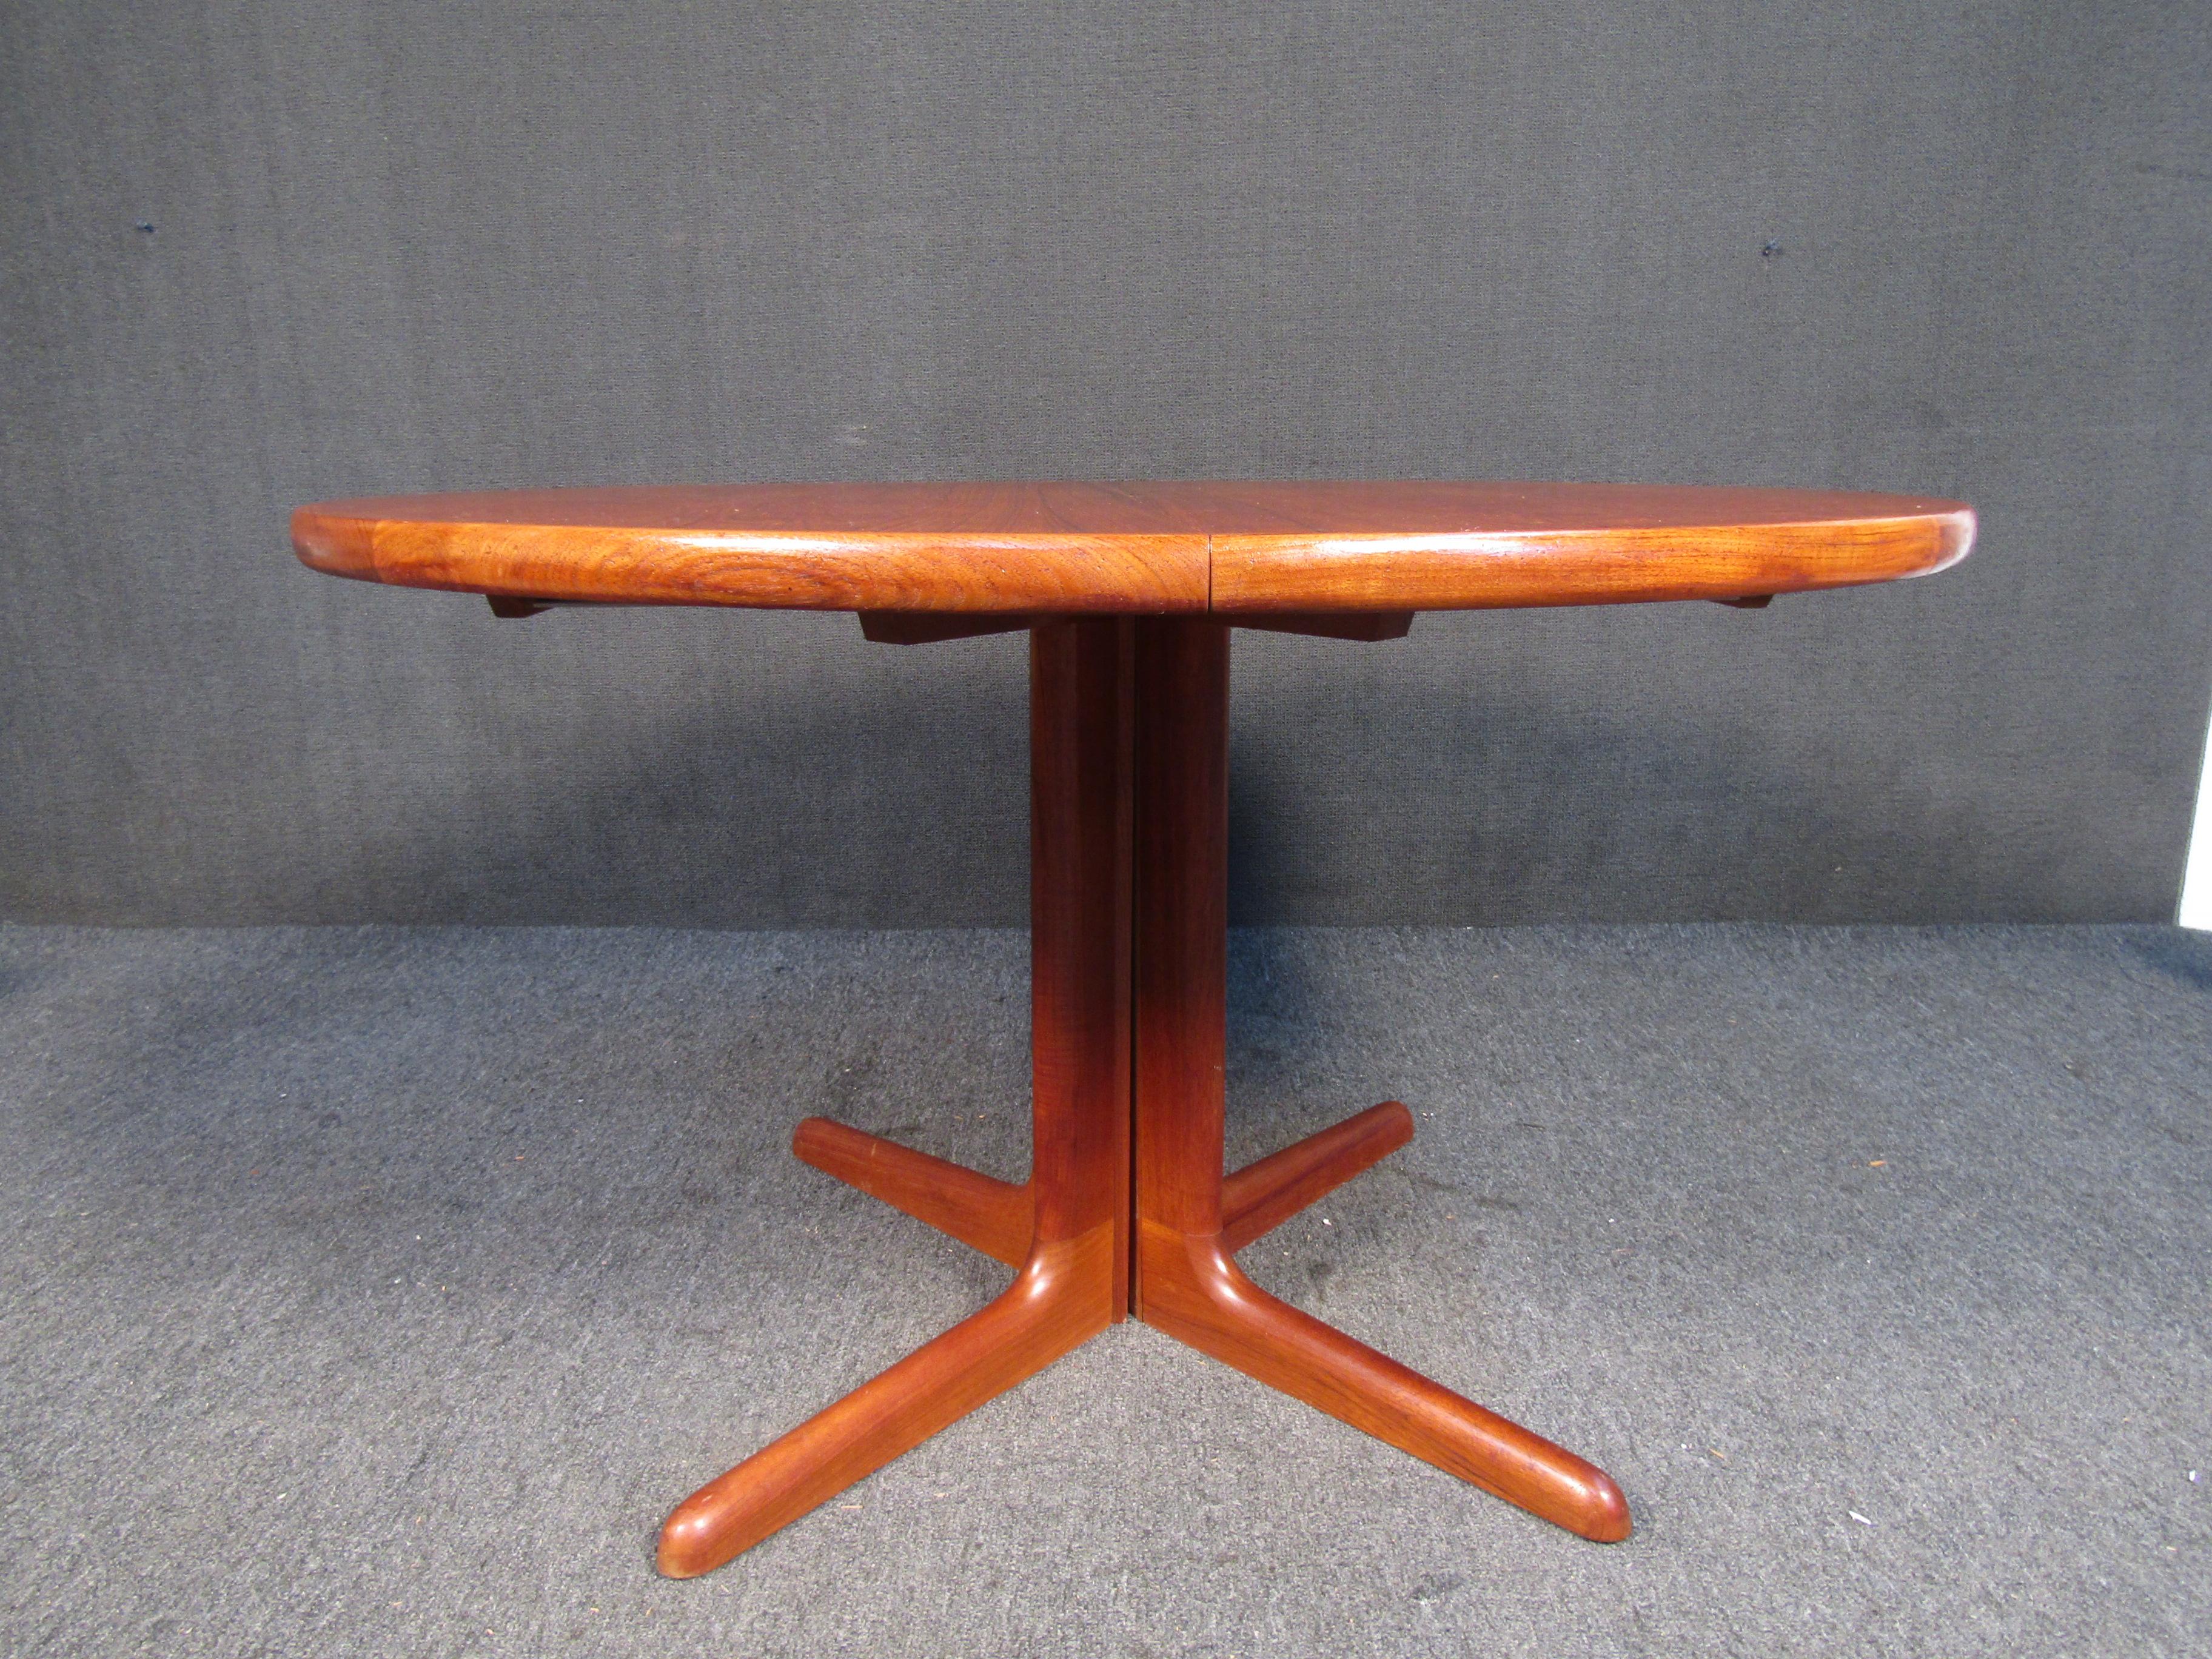 An incredible Danish dining table by Skovby Møbelfabrik A/S. Round table crafted in rich teak with pedestal base. 
Please confirm item location with seller (NY/NJ).